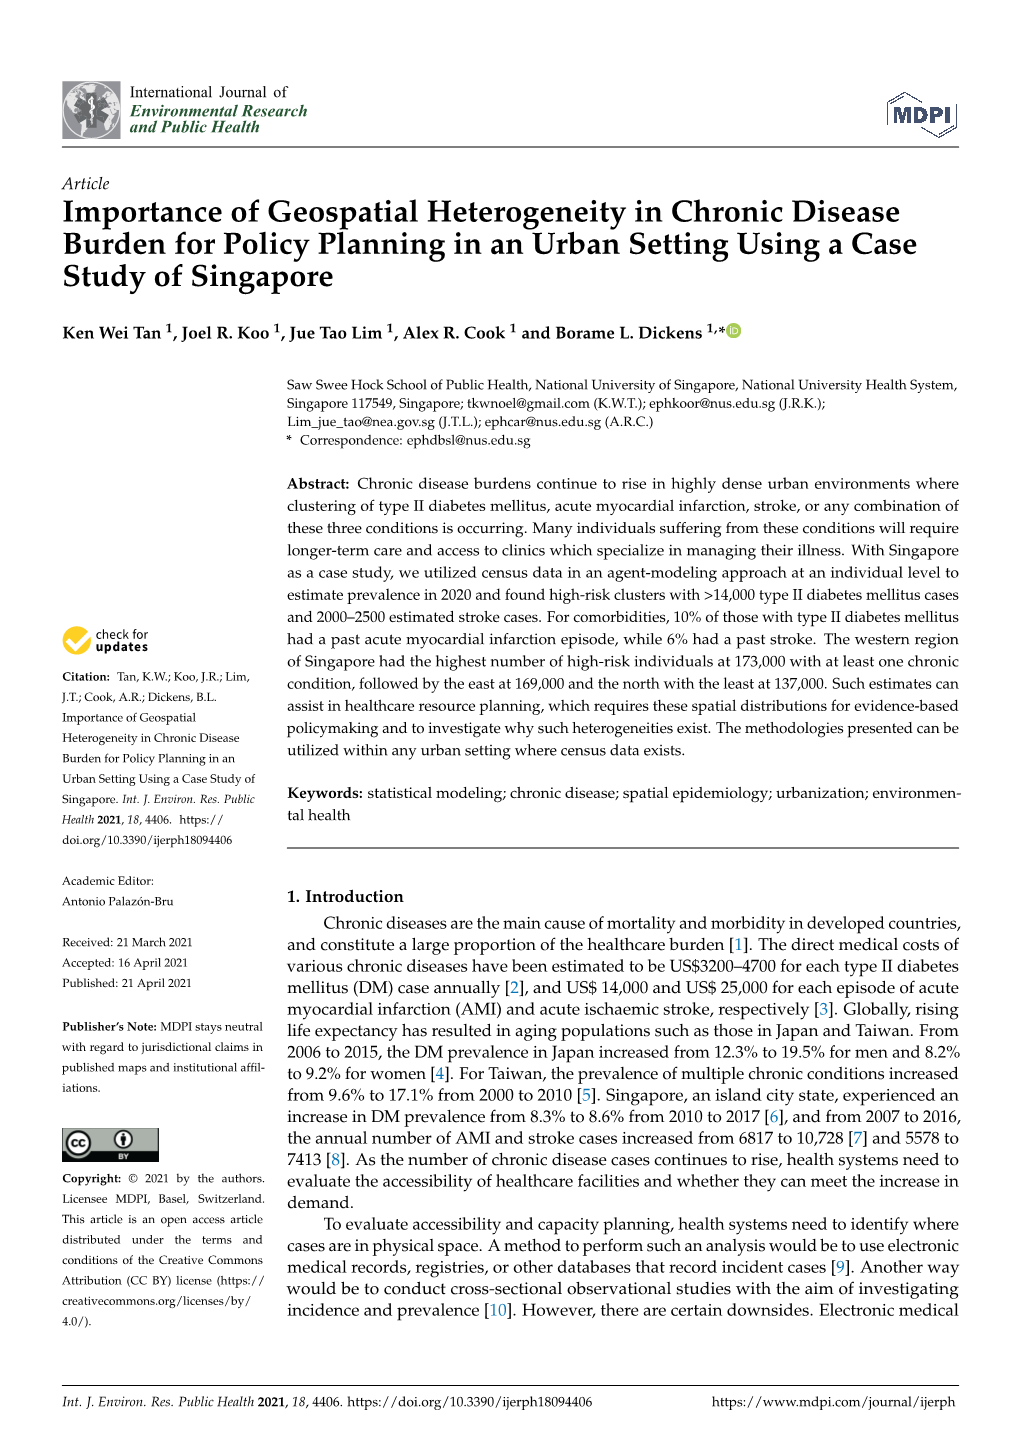 Importance of Geospatial Heterogeneity in Chronic Disease Burden for Policy Planning in an Urban Setting Using a Case Study of Singapore